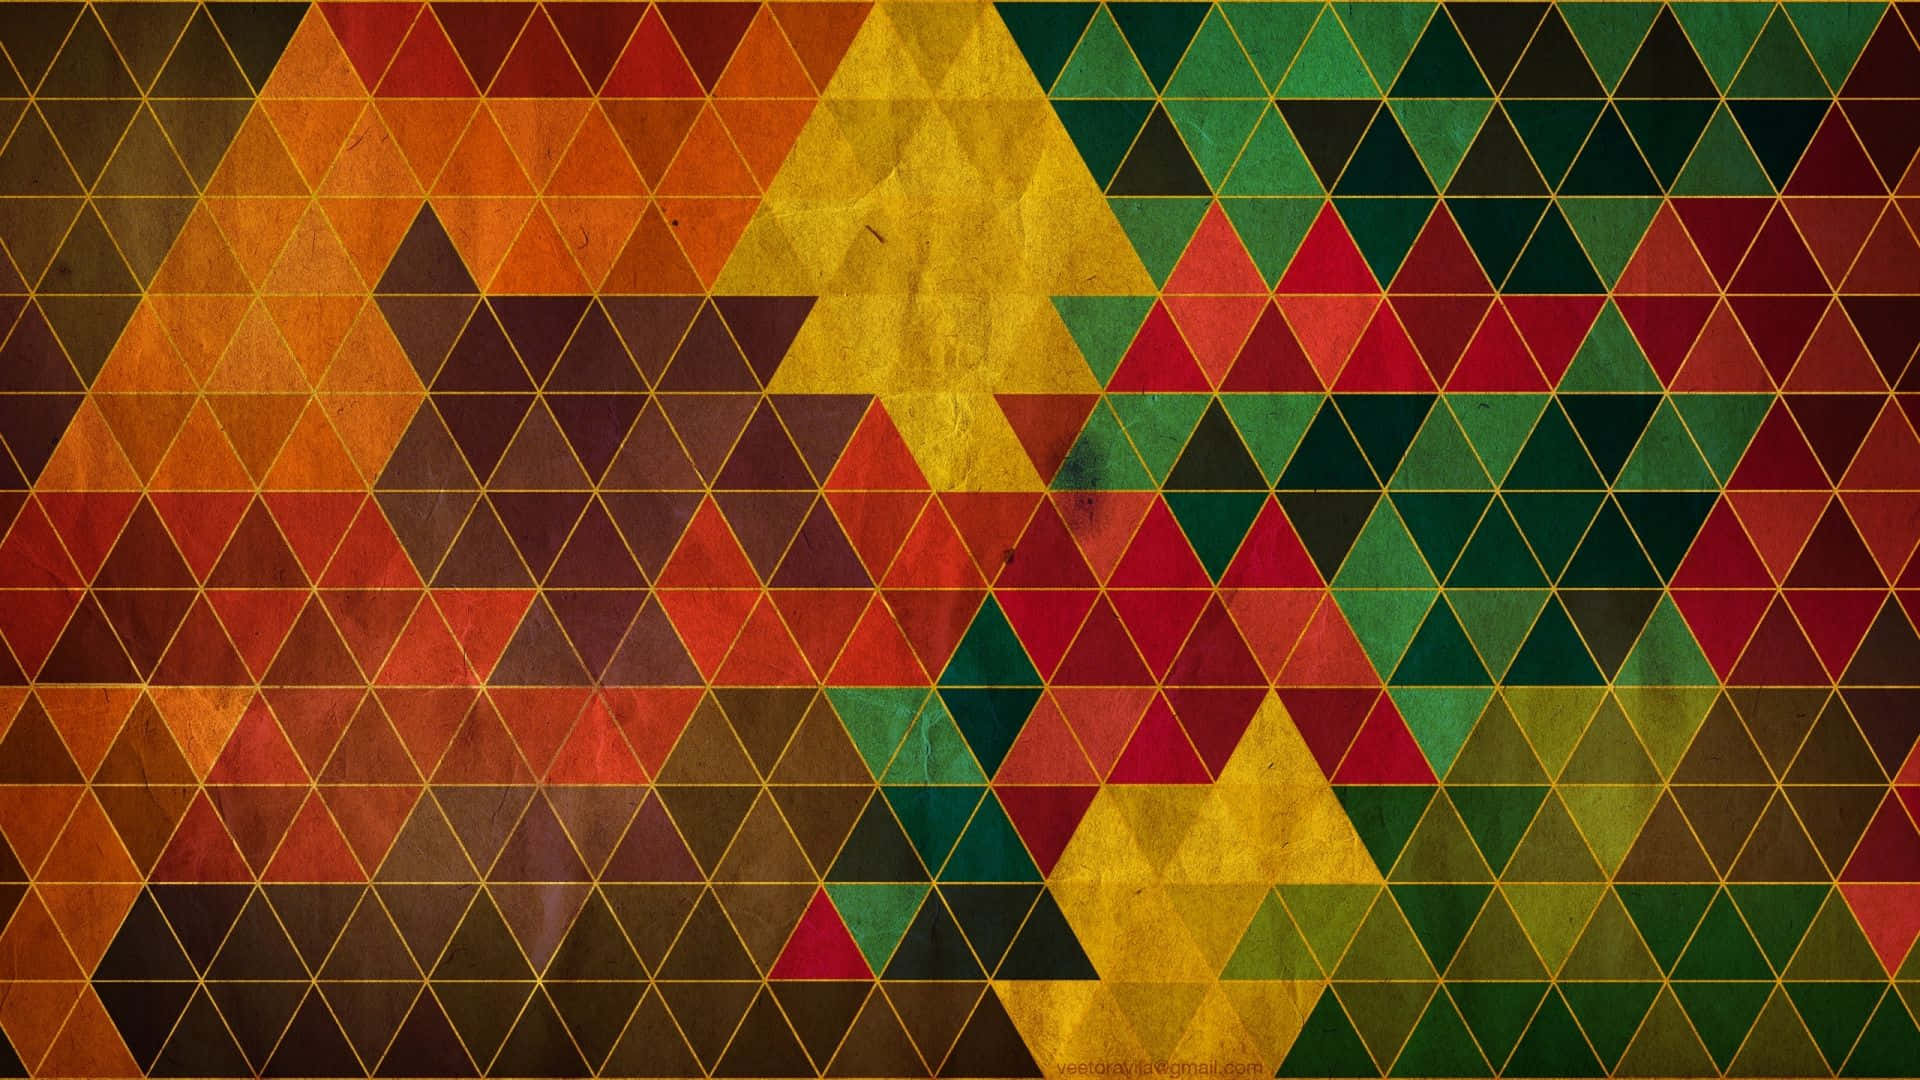 A multicolored abstract triangle pattern